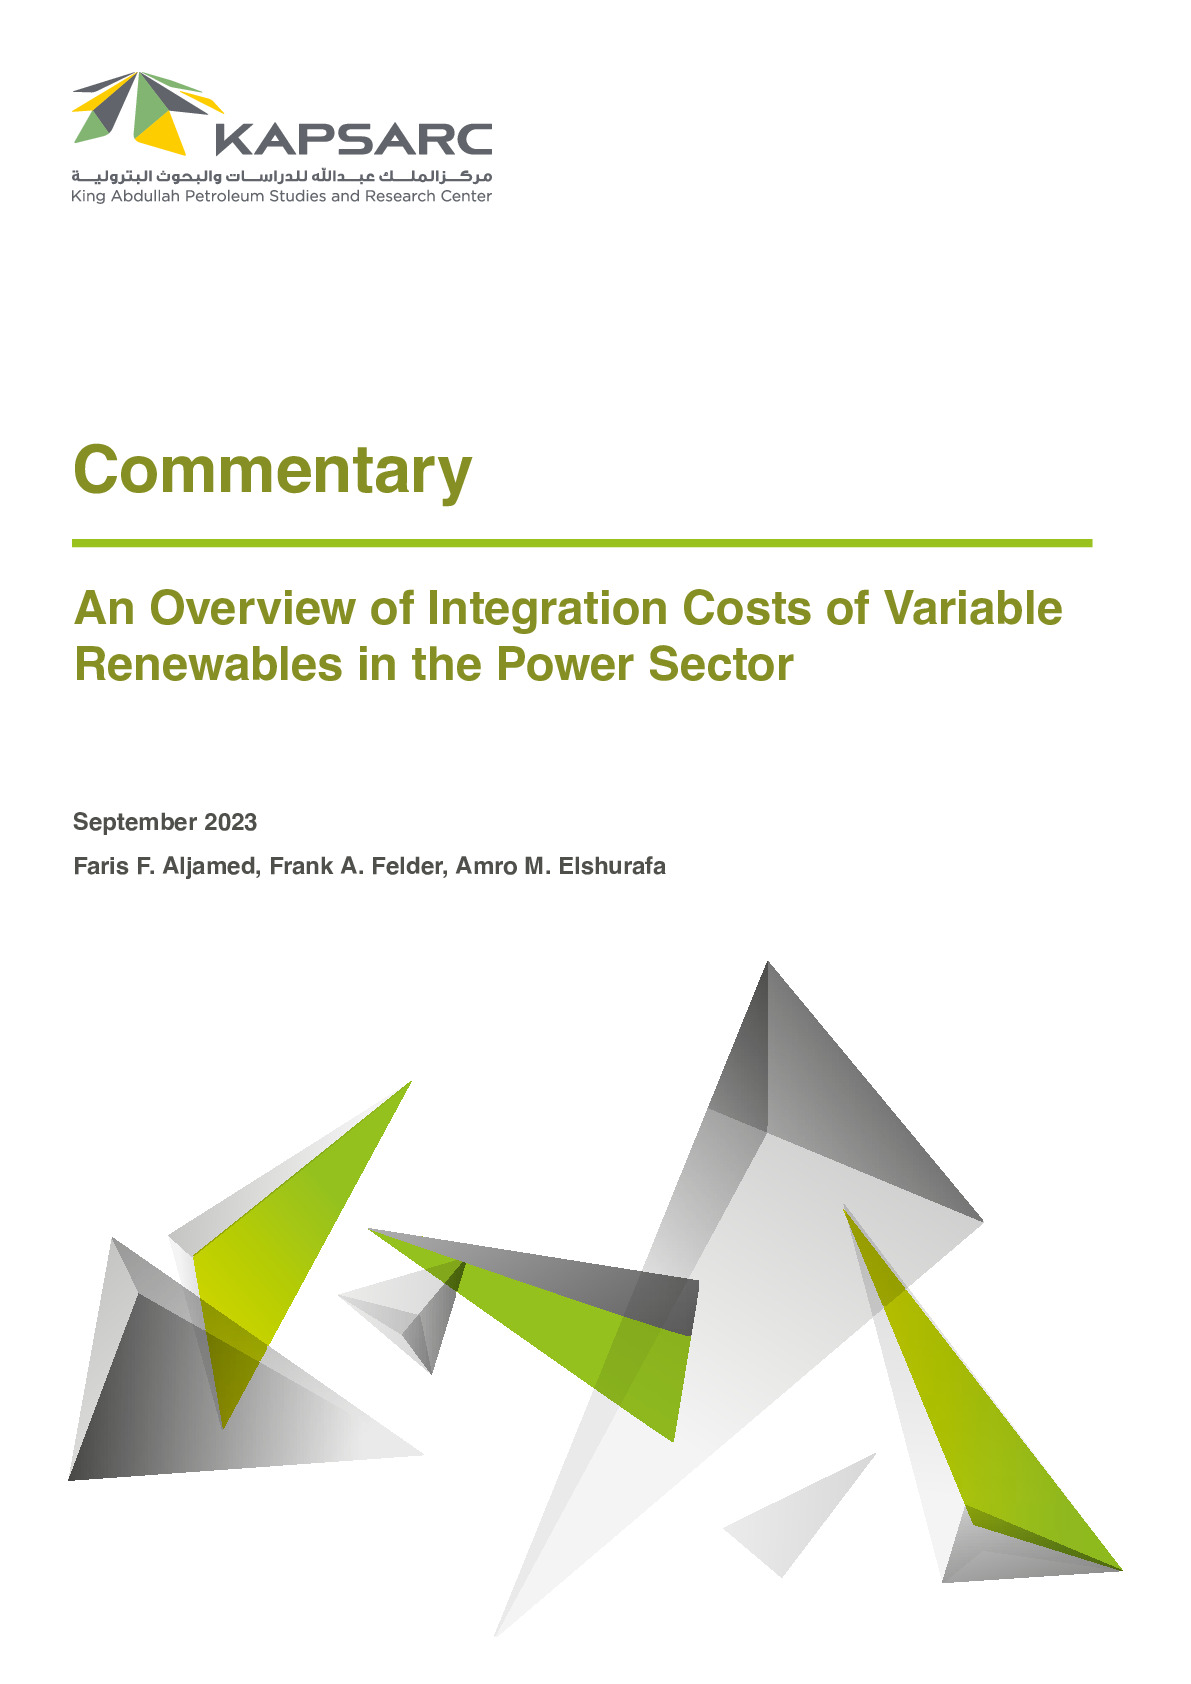 An Overview of Integration Costs of Variable Renewables in the Power Sector